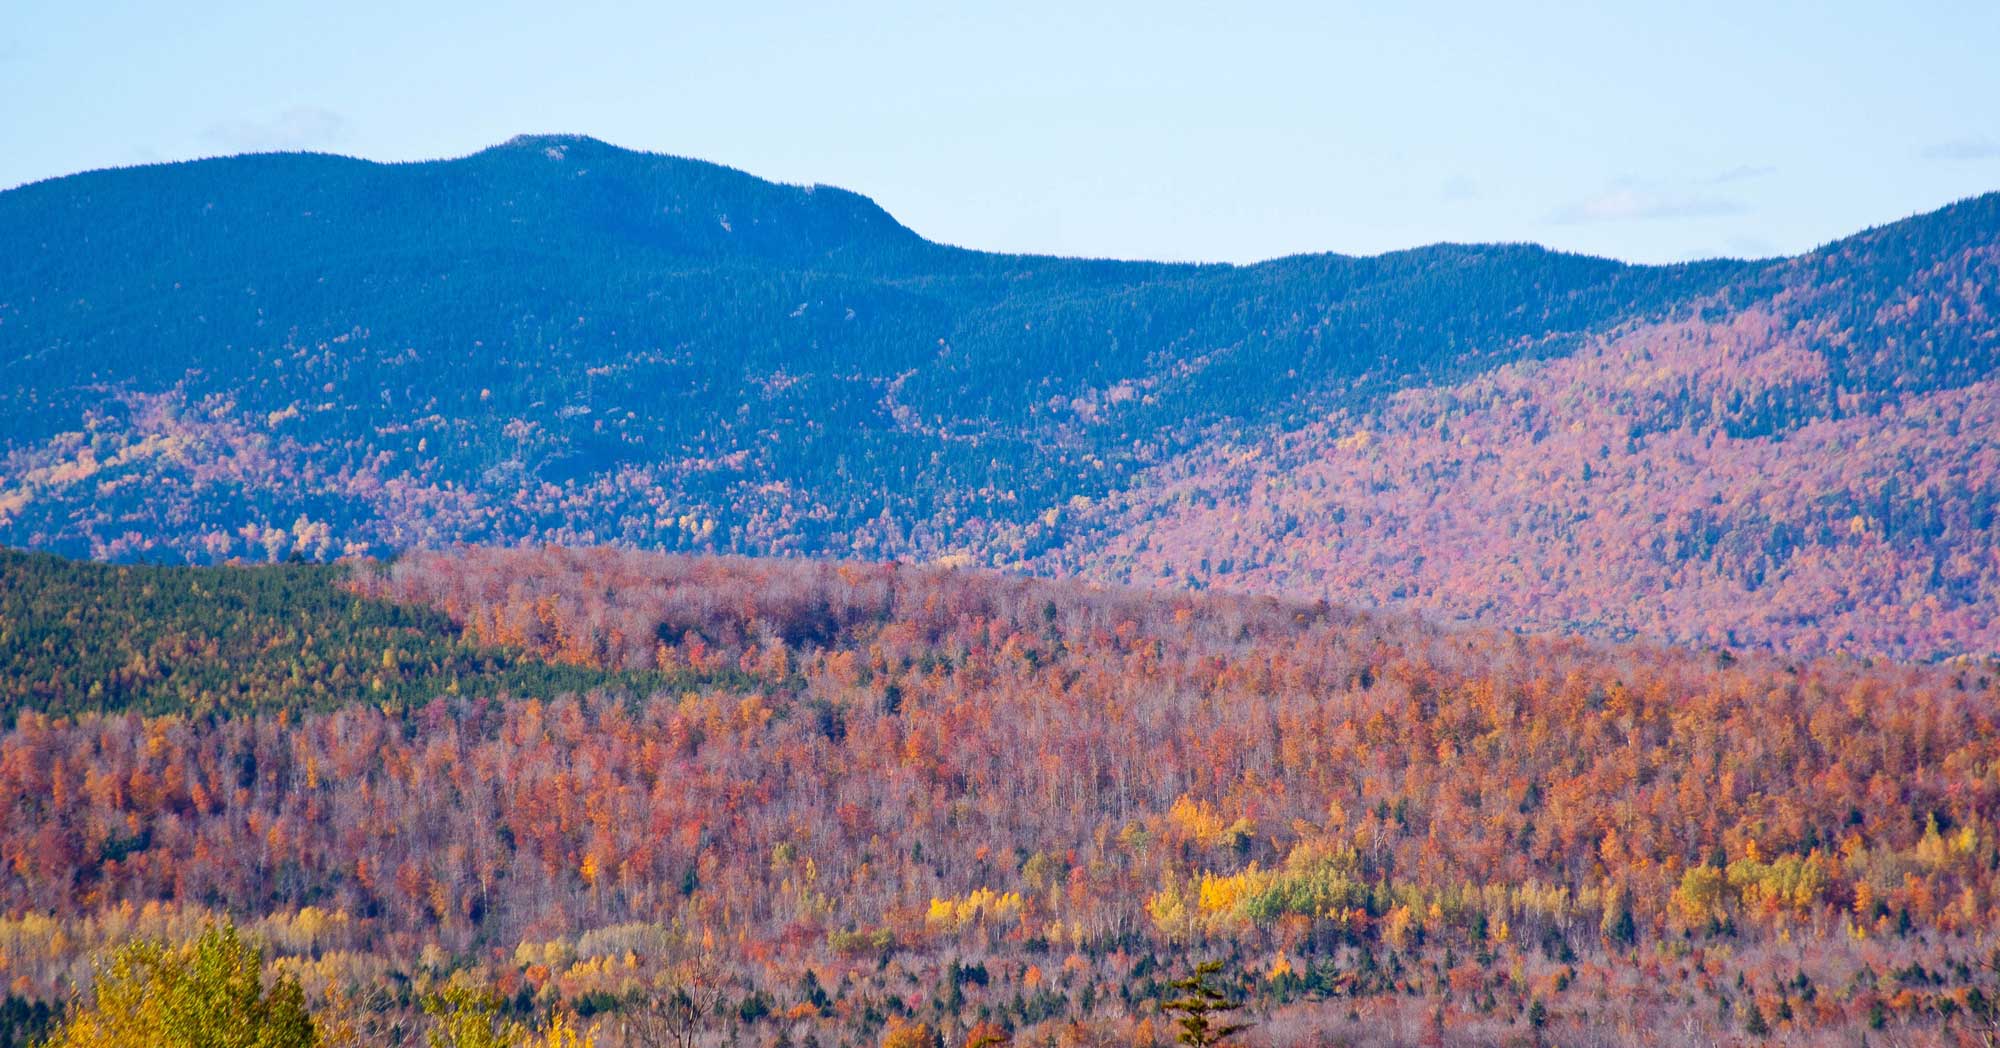 Photograph of Sugarloaf Mountain, Maine. The photo shows a rounded mountain peak in the distance at the left, sloping down to a low ridge at the center of the image, with the ridge continuing at roughly the same height toward the right side. A lower hill is in the foreground. Both mountain and hill are covered with tress, some without leaves, some in fall colors, and some green. 